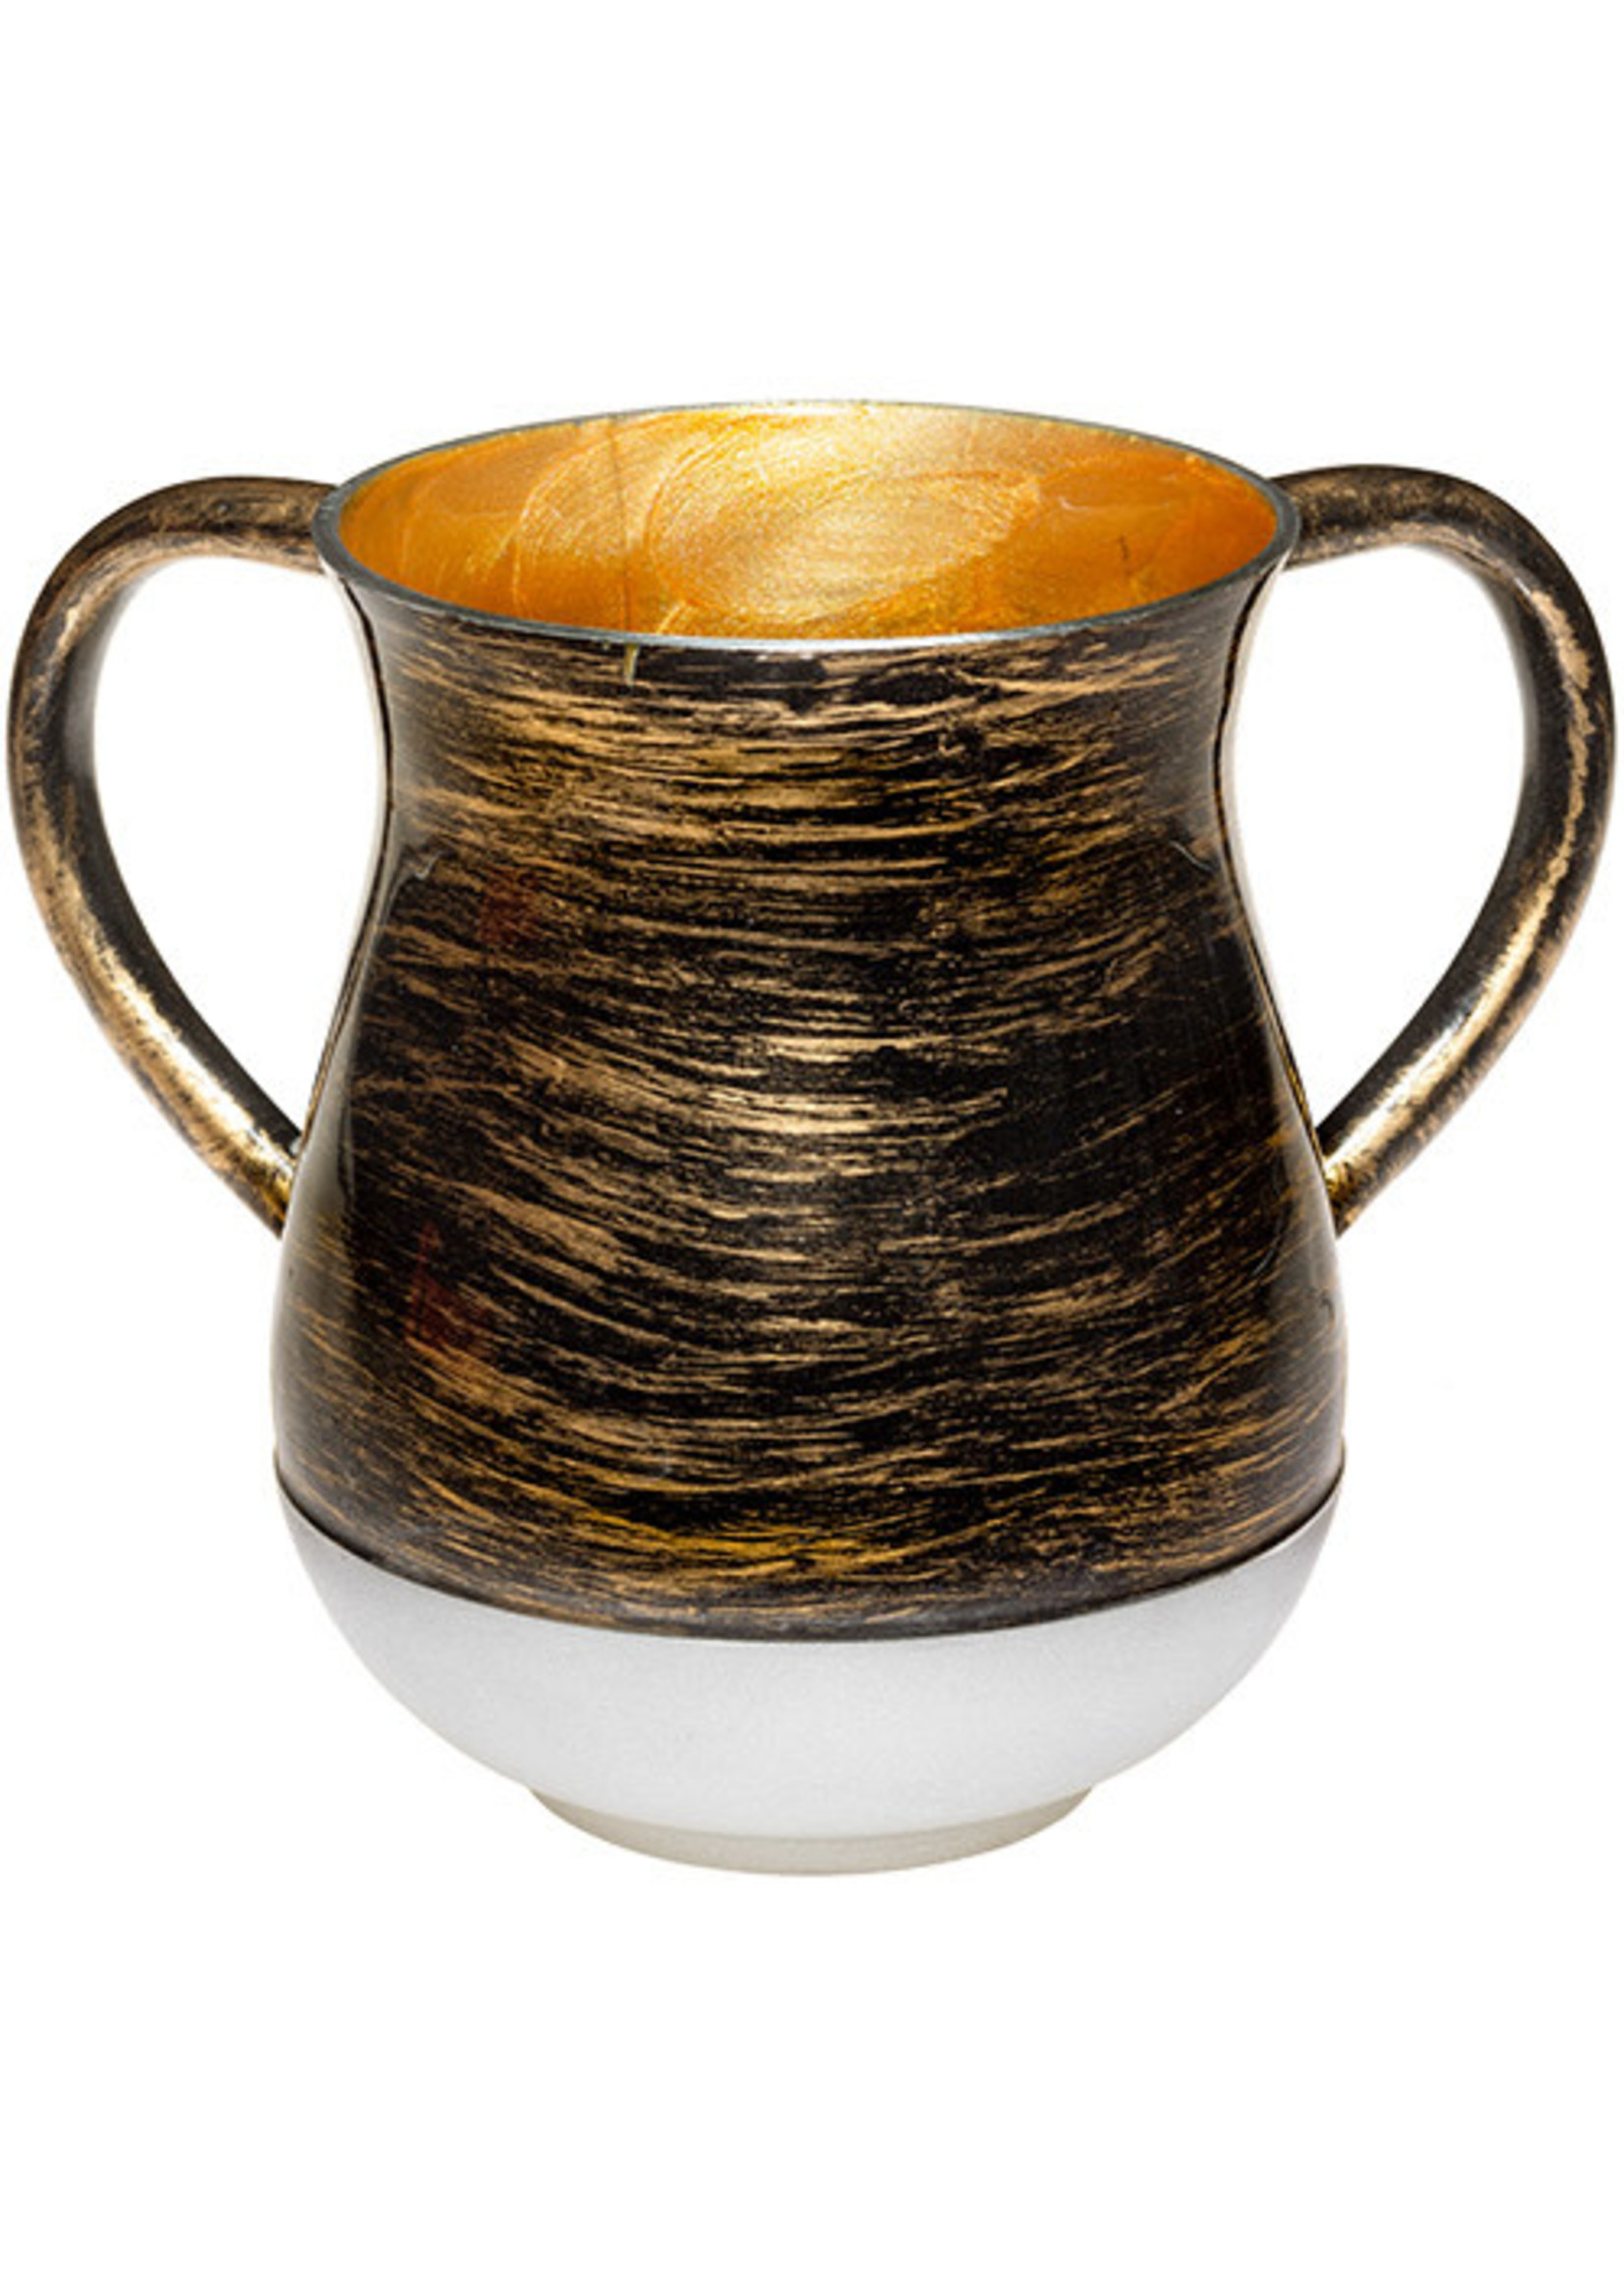 WASHING CUP BLACK AND GOLD 13CM